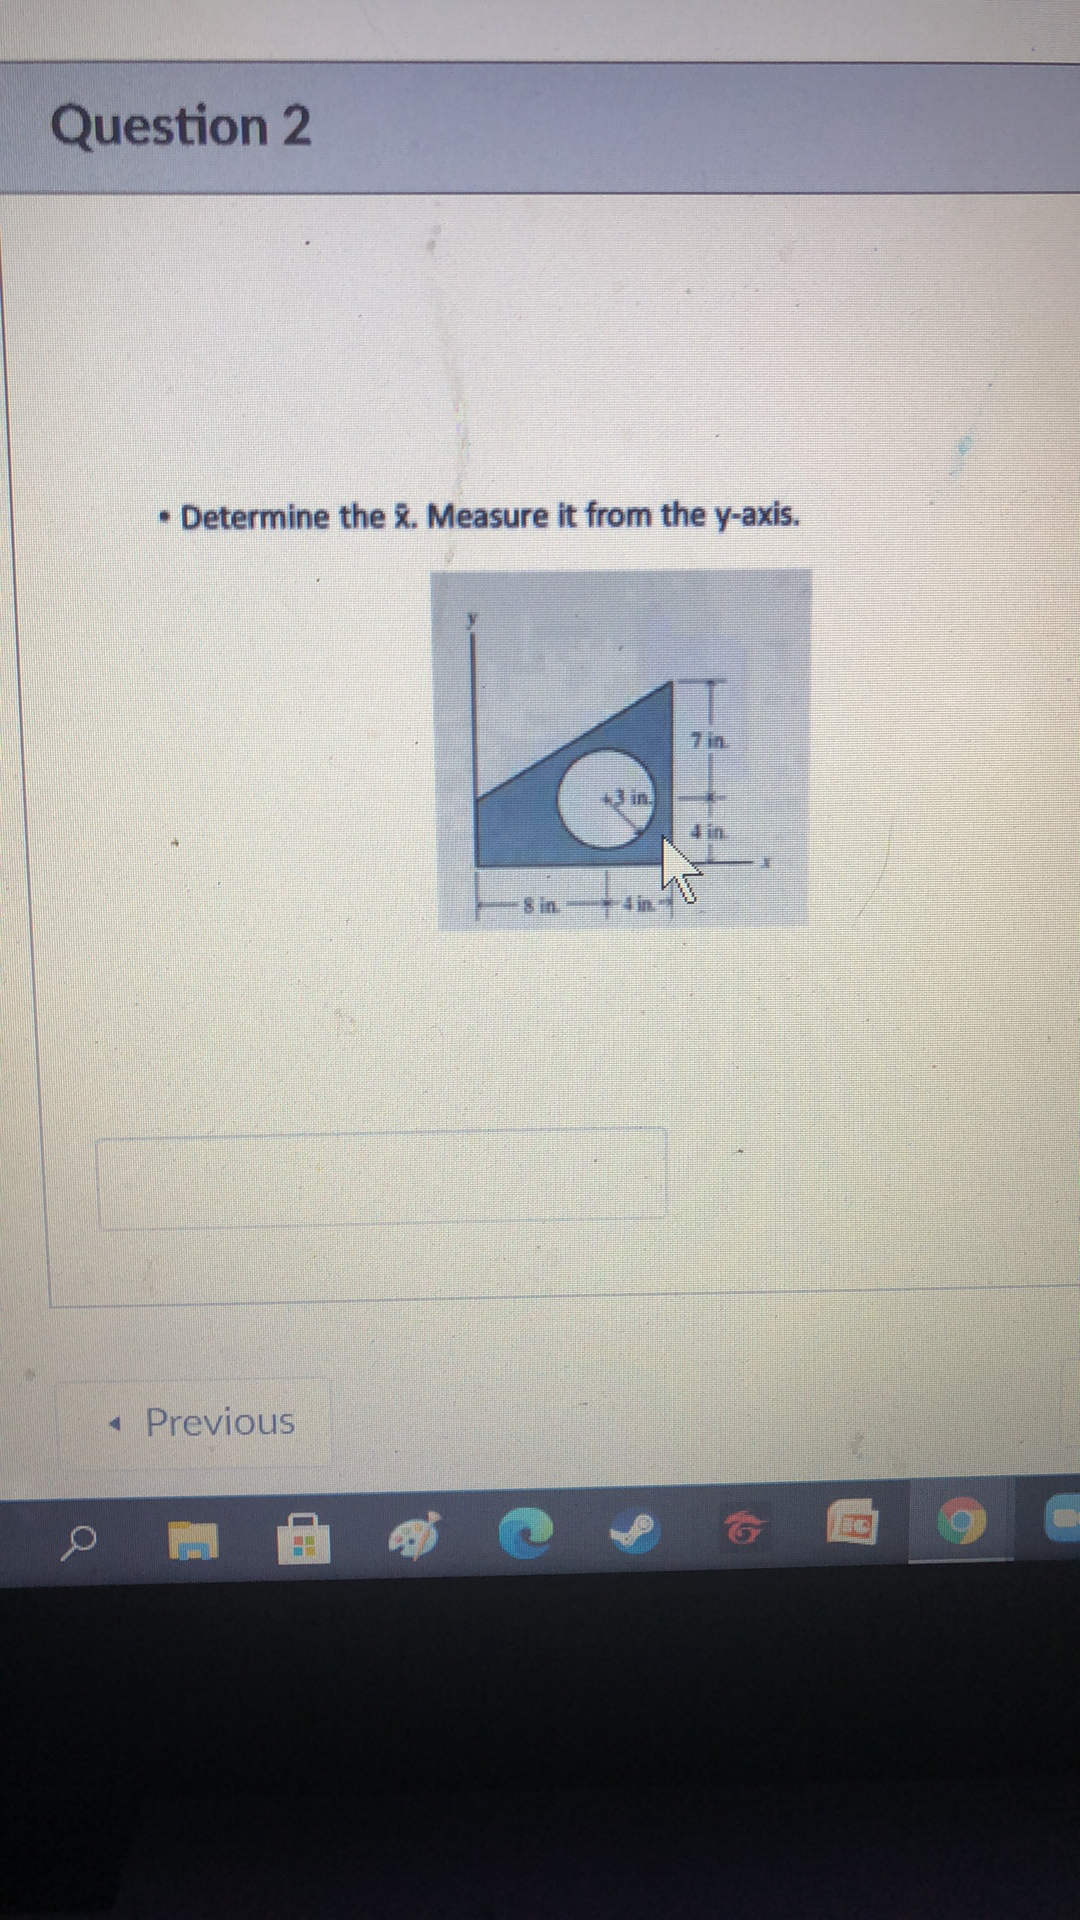 Question 2
• Determine the &. Measure it from the y-axis.
7 in
43 in.
4 in.
8 in.
4 in.
« Previous
